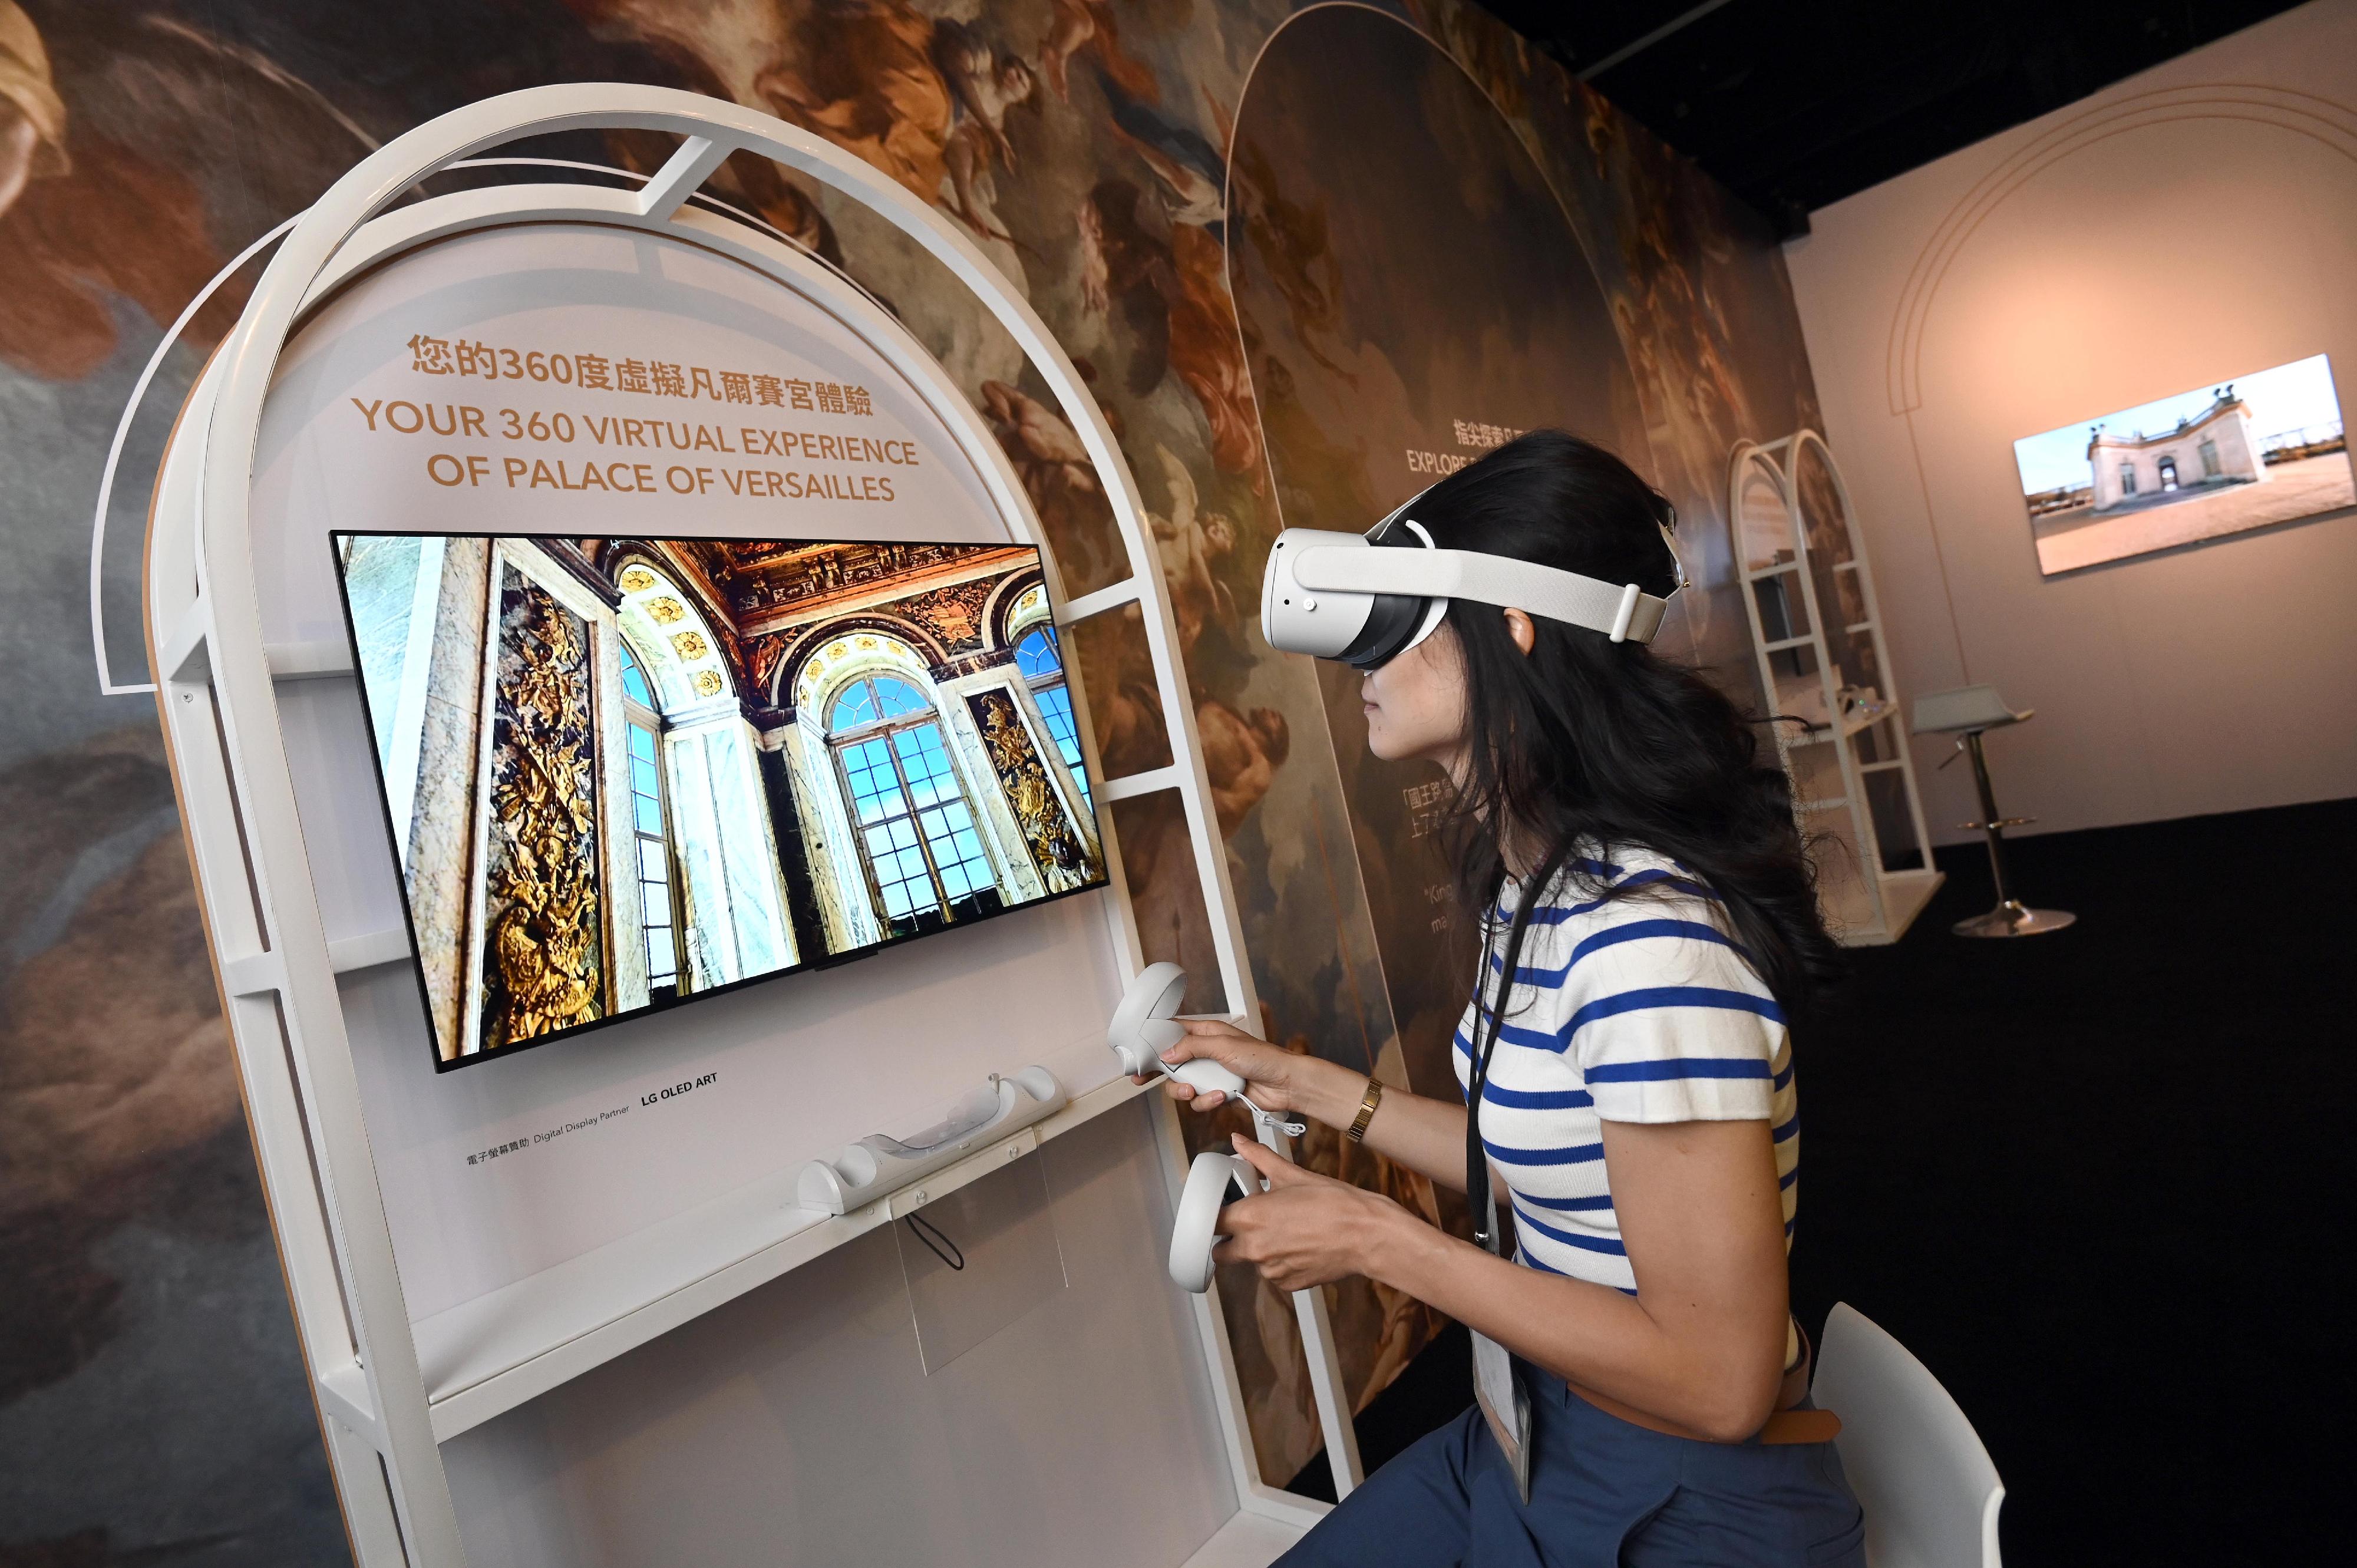 The opening ceremony for the exhibition "Virtually Versailles" was held today (April 19) at the Hong Kong Heritage Museum. Photo shows a 3D gallery that takes visitors on a virtual-reality tour inside the Palace of Versailles to look into details of the interior decor and architectural features of selected architectures at the Palace.